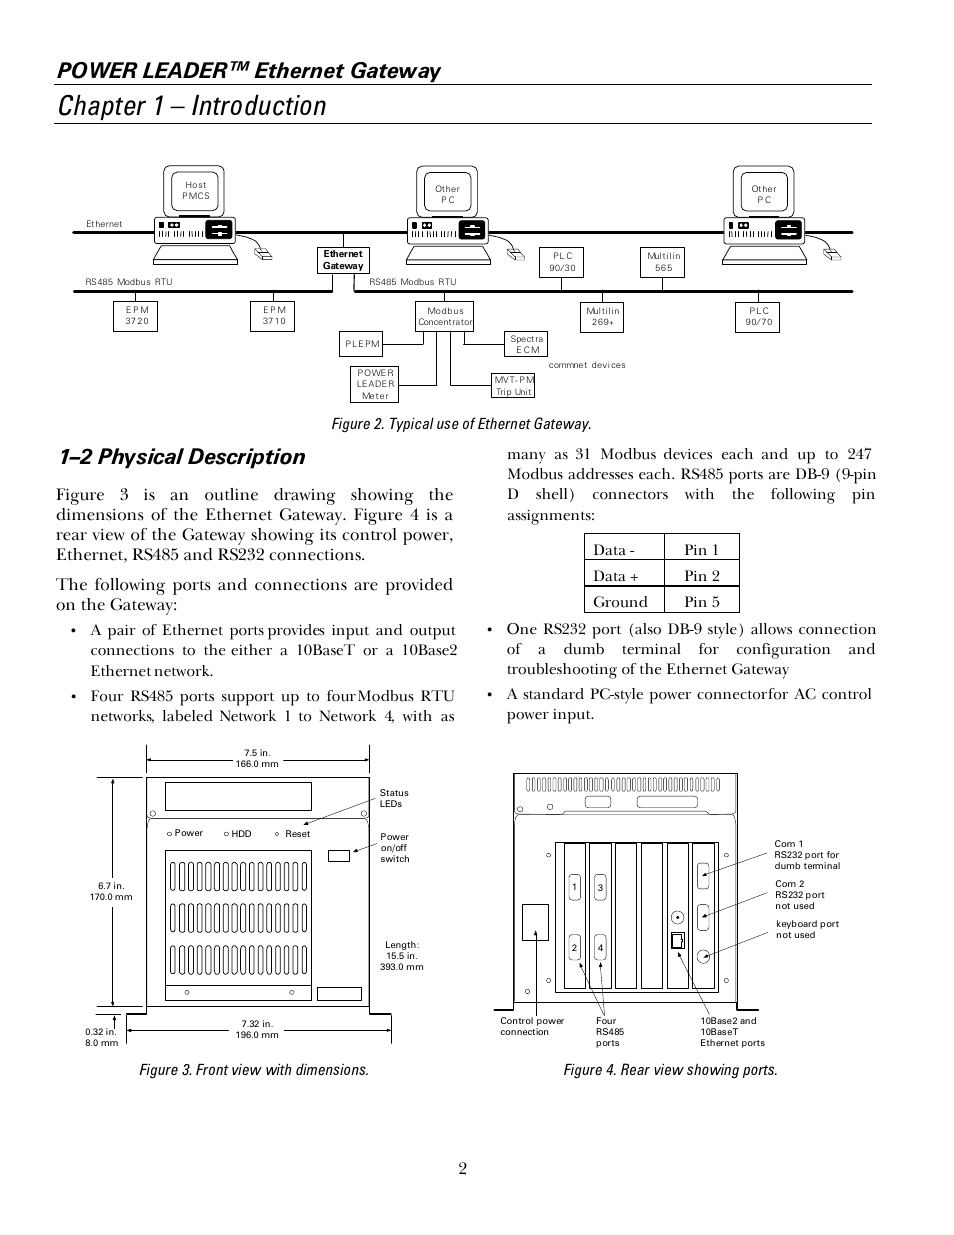 2 physical description, Chapter 1 – introduction, Power leader™ ethernet gateway | 1–2 physical description, Figure 2. typical use of ethernet gateway, Figure 3. front view with dimensions, Figure 4. rear view showing ports | GE GEH6505A User Manual | Page 6 / 24